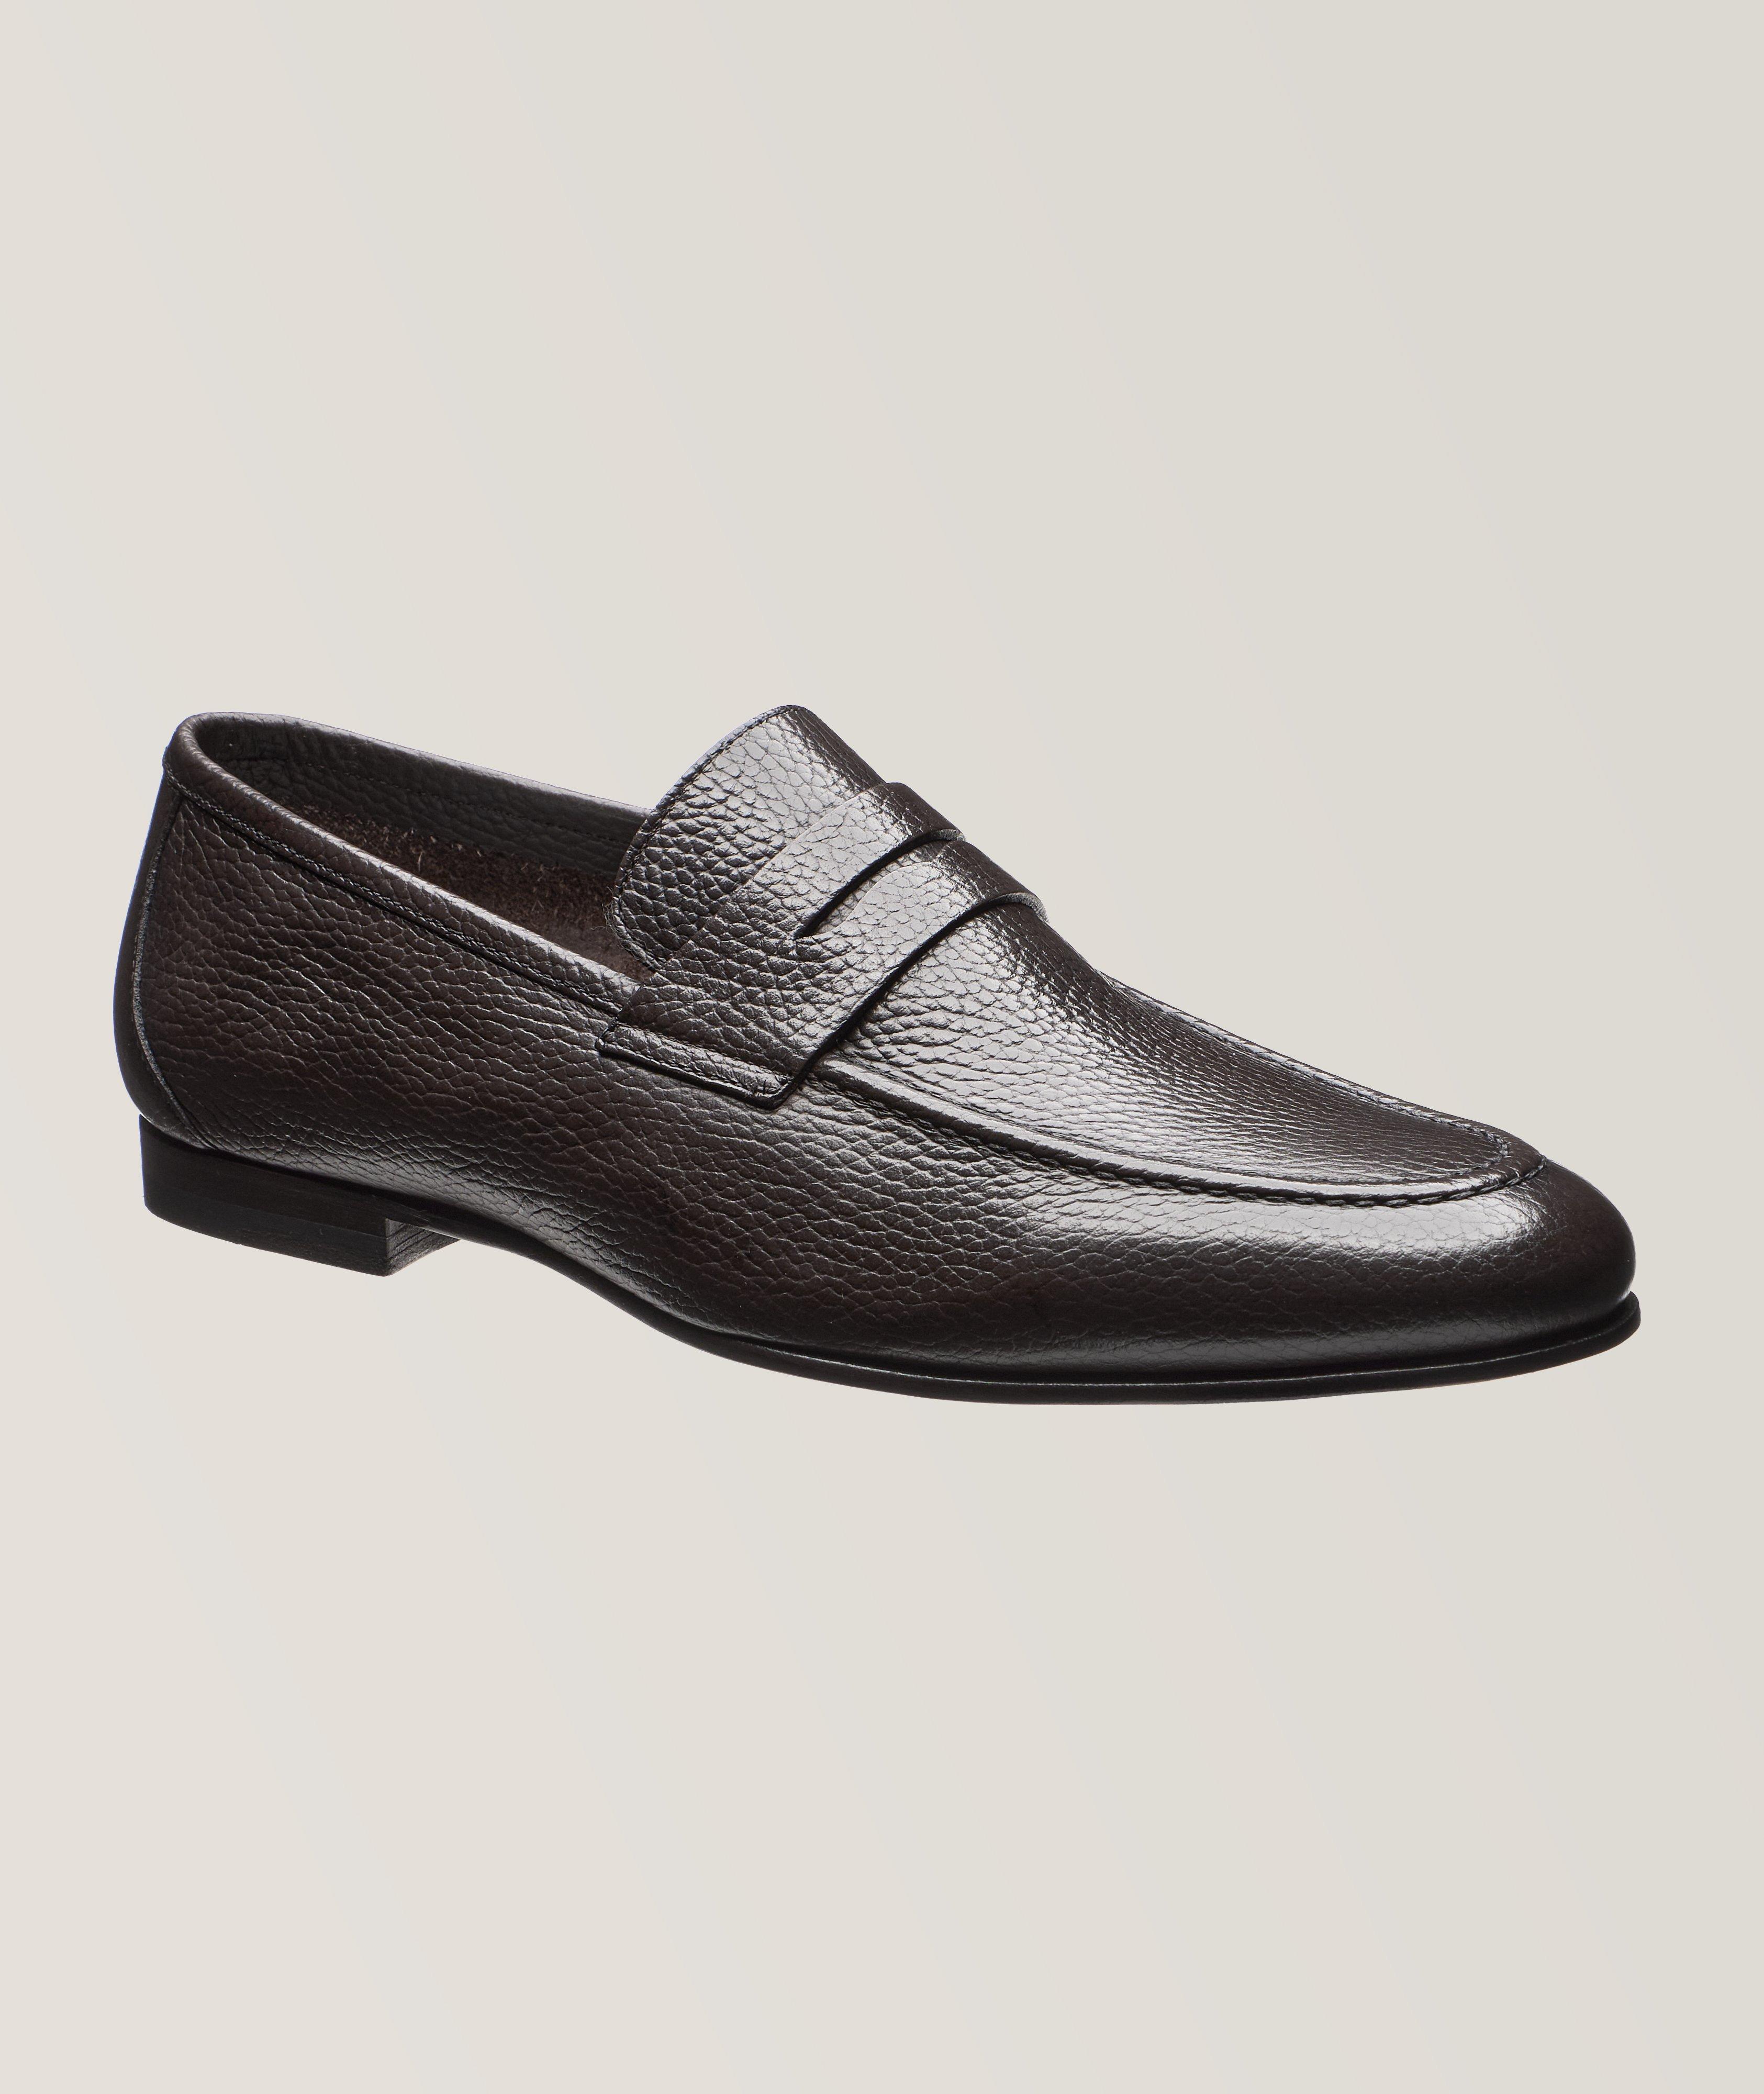 Ravello Grain Leather Penny Loafers image 0